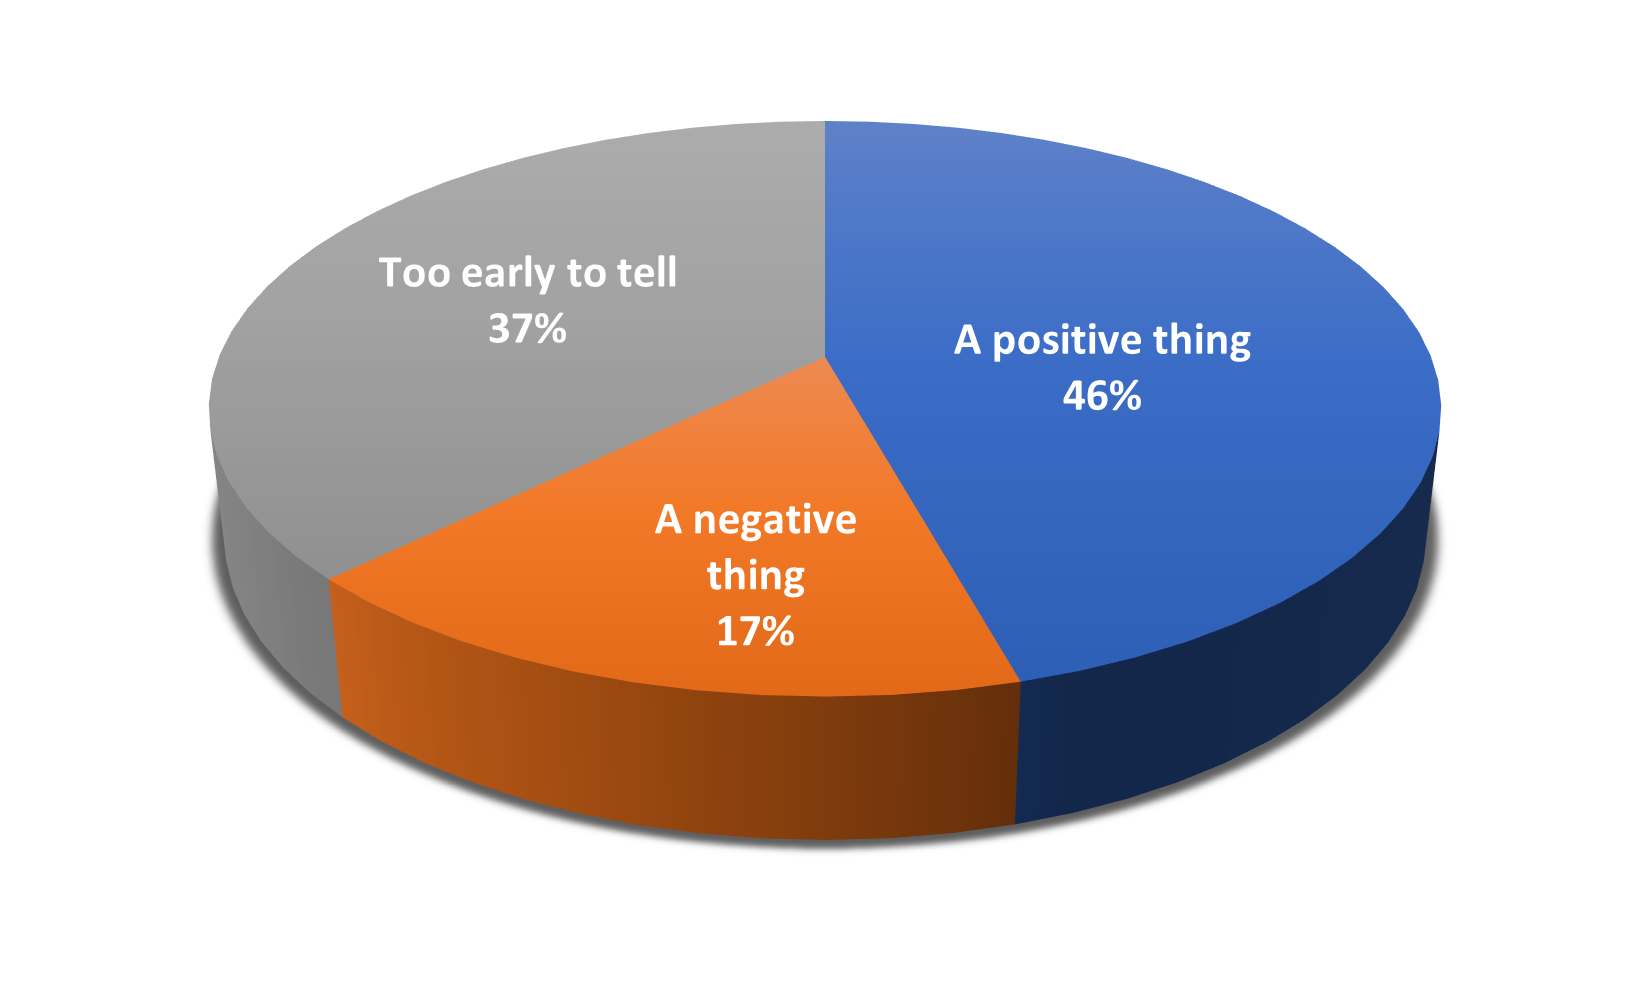 Do you see AI as a positive or negative thing?